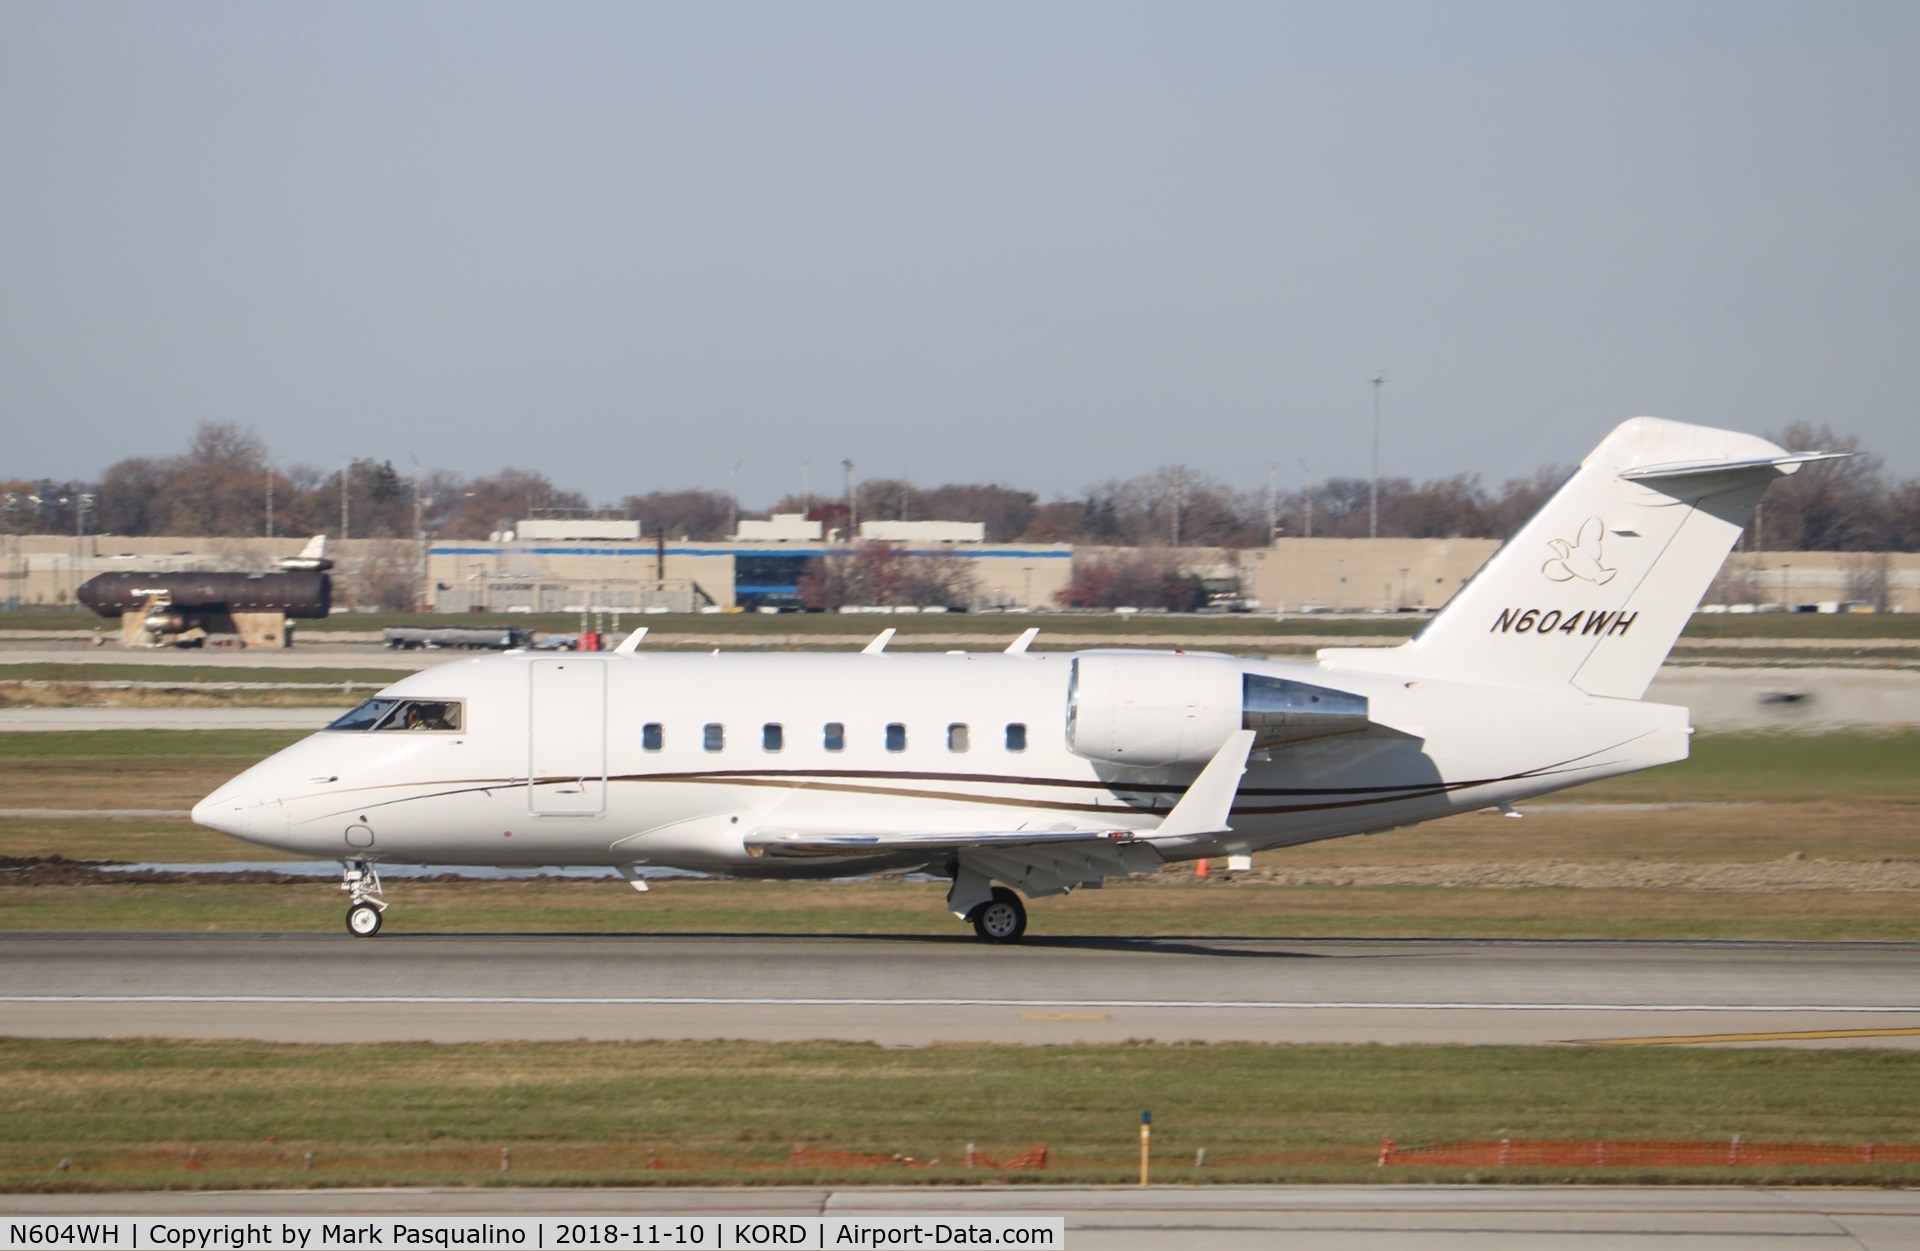 N604WH, 1998 Bombardier Challenger 604 (CL-600-2B16) C/N 5370, Challenger 604